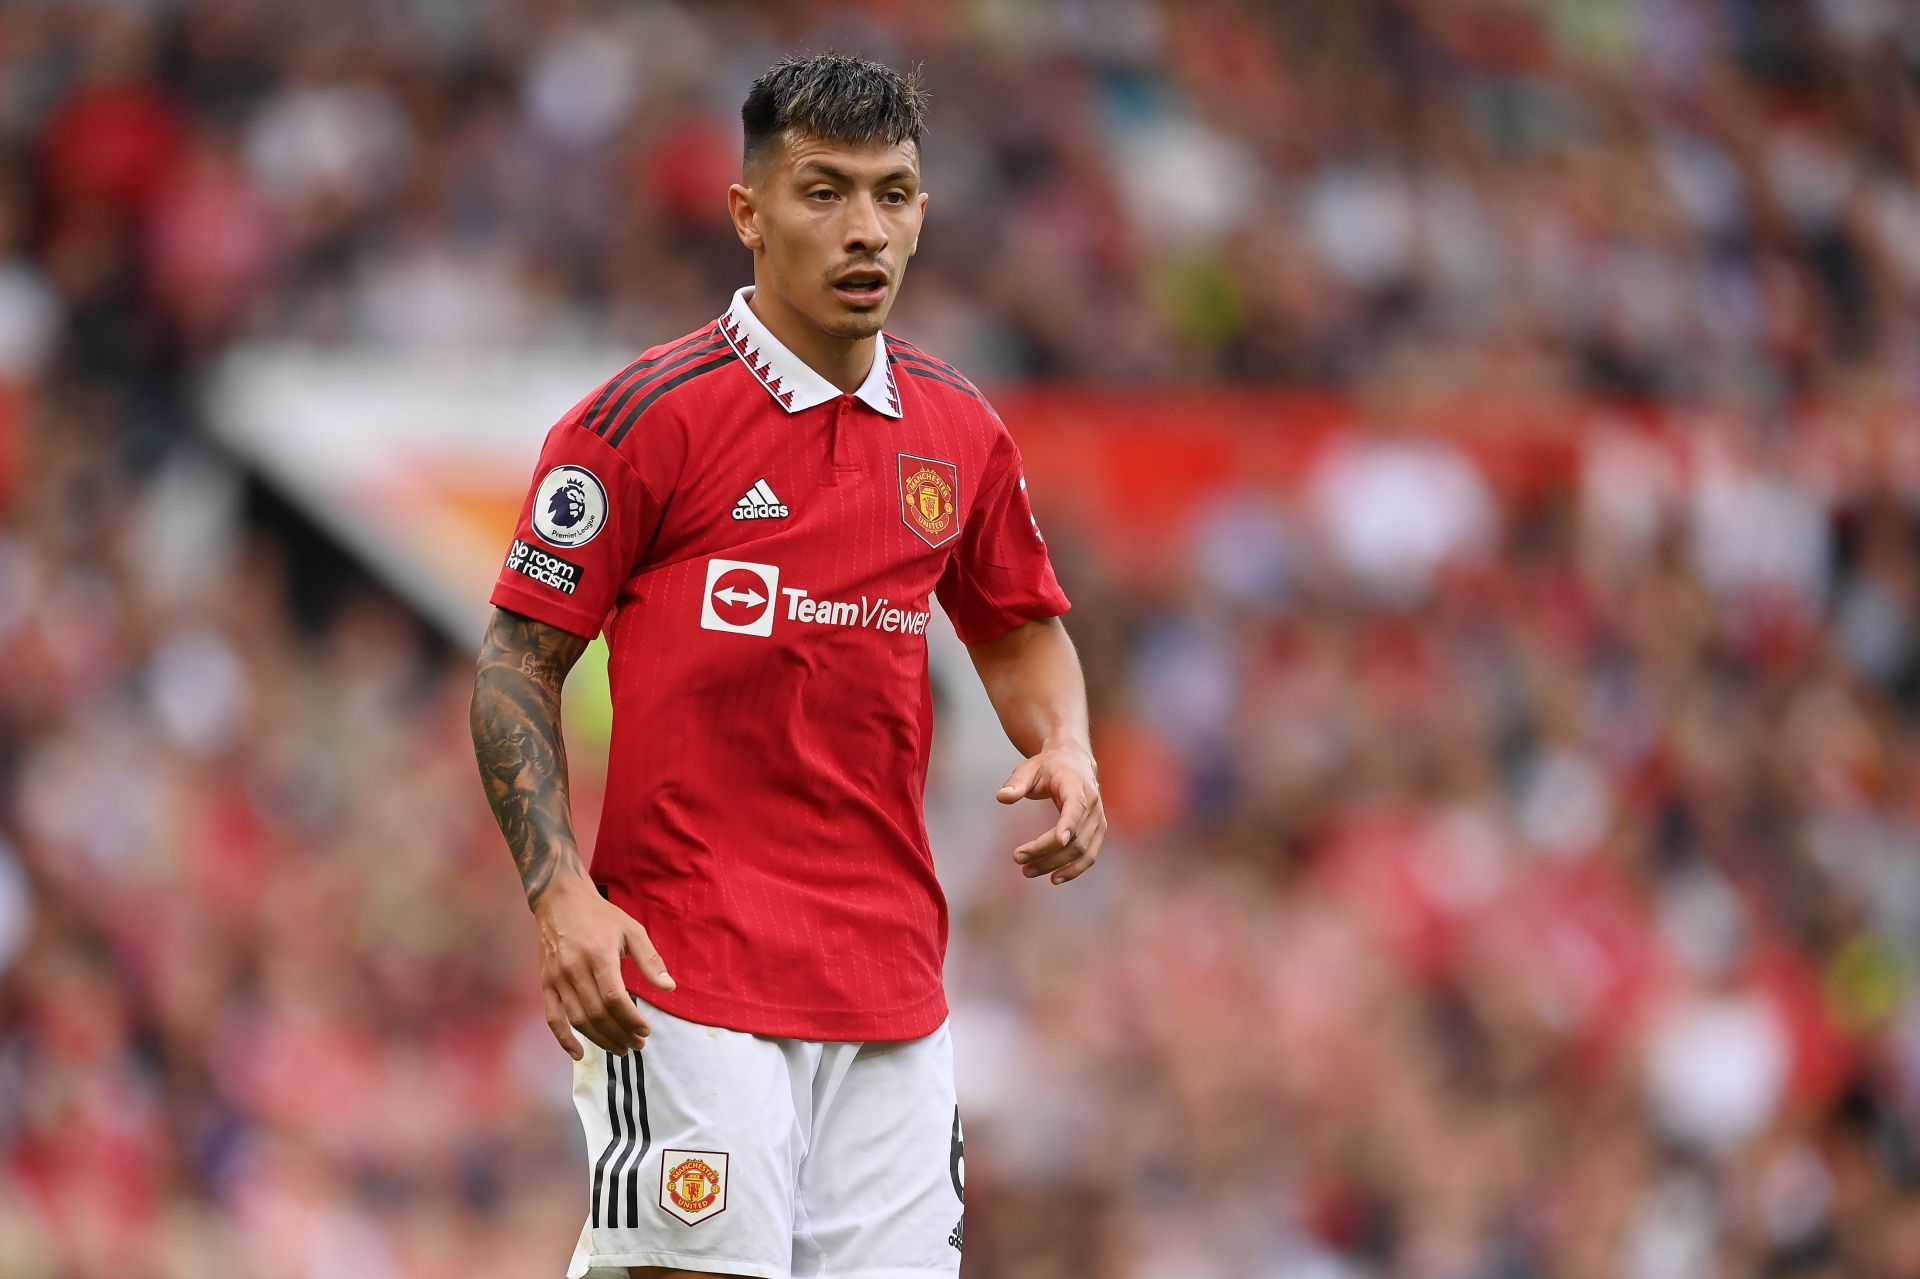 Lisandro Martinez has hit the ground running at Old Trafford this summer.